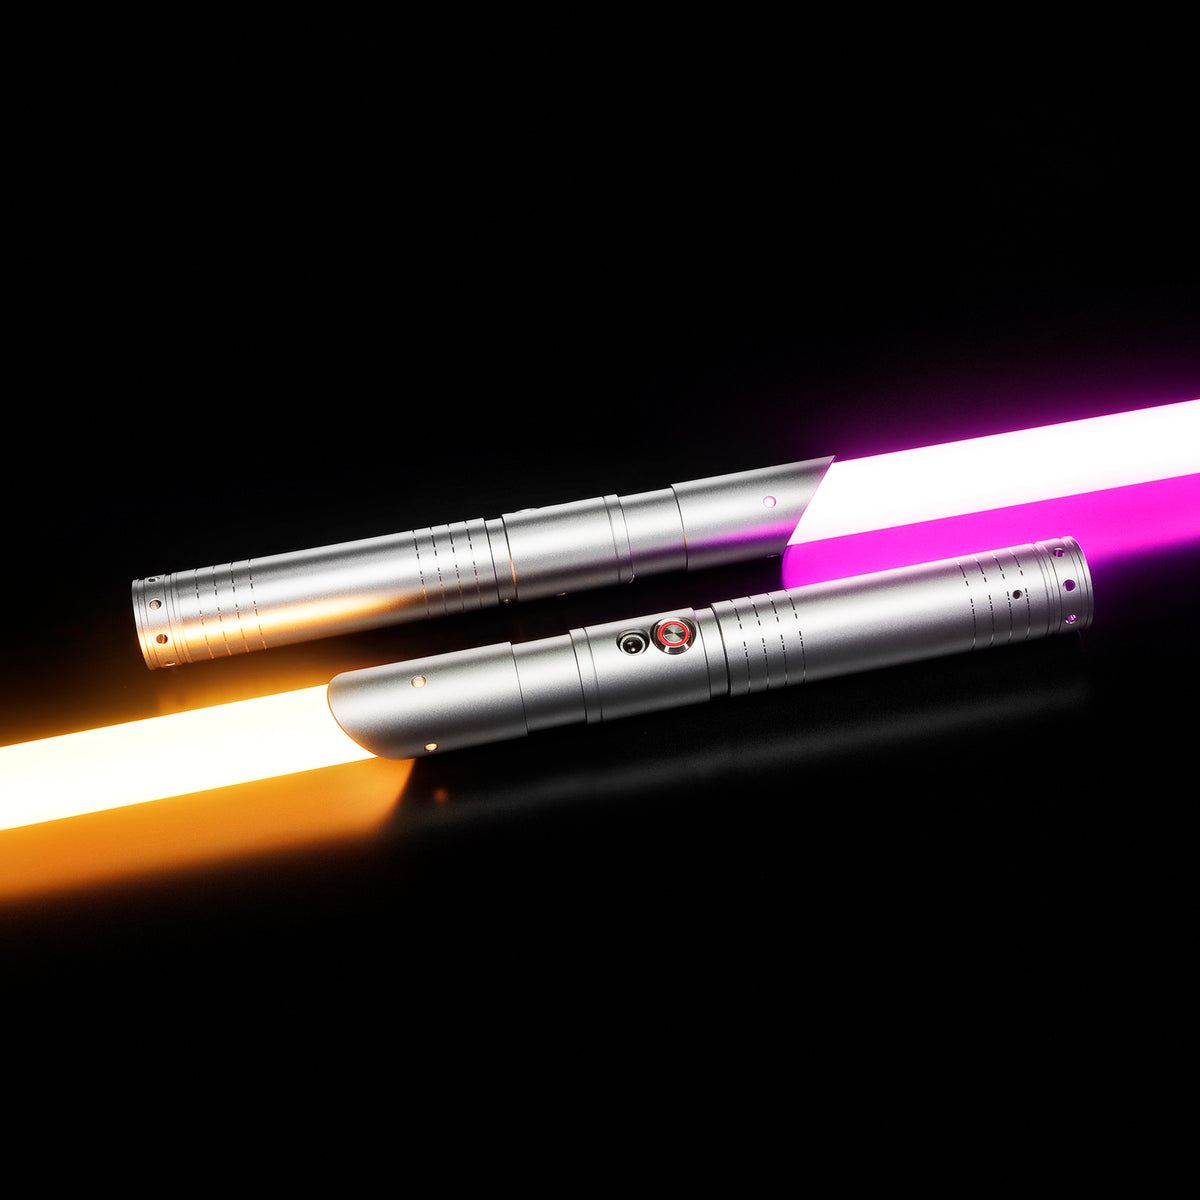 2 x SaberCustom heavy dueling lightsaber fx smooth swing 16 sound fonts infinite color changing 72CM blade Z4 2 x Grey